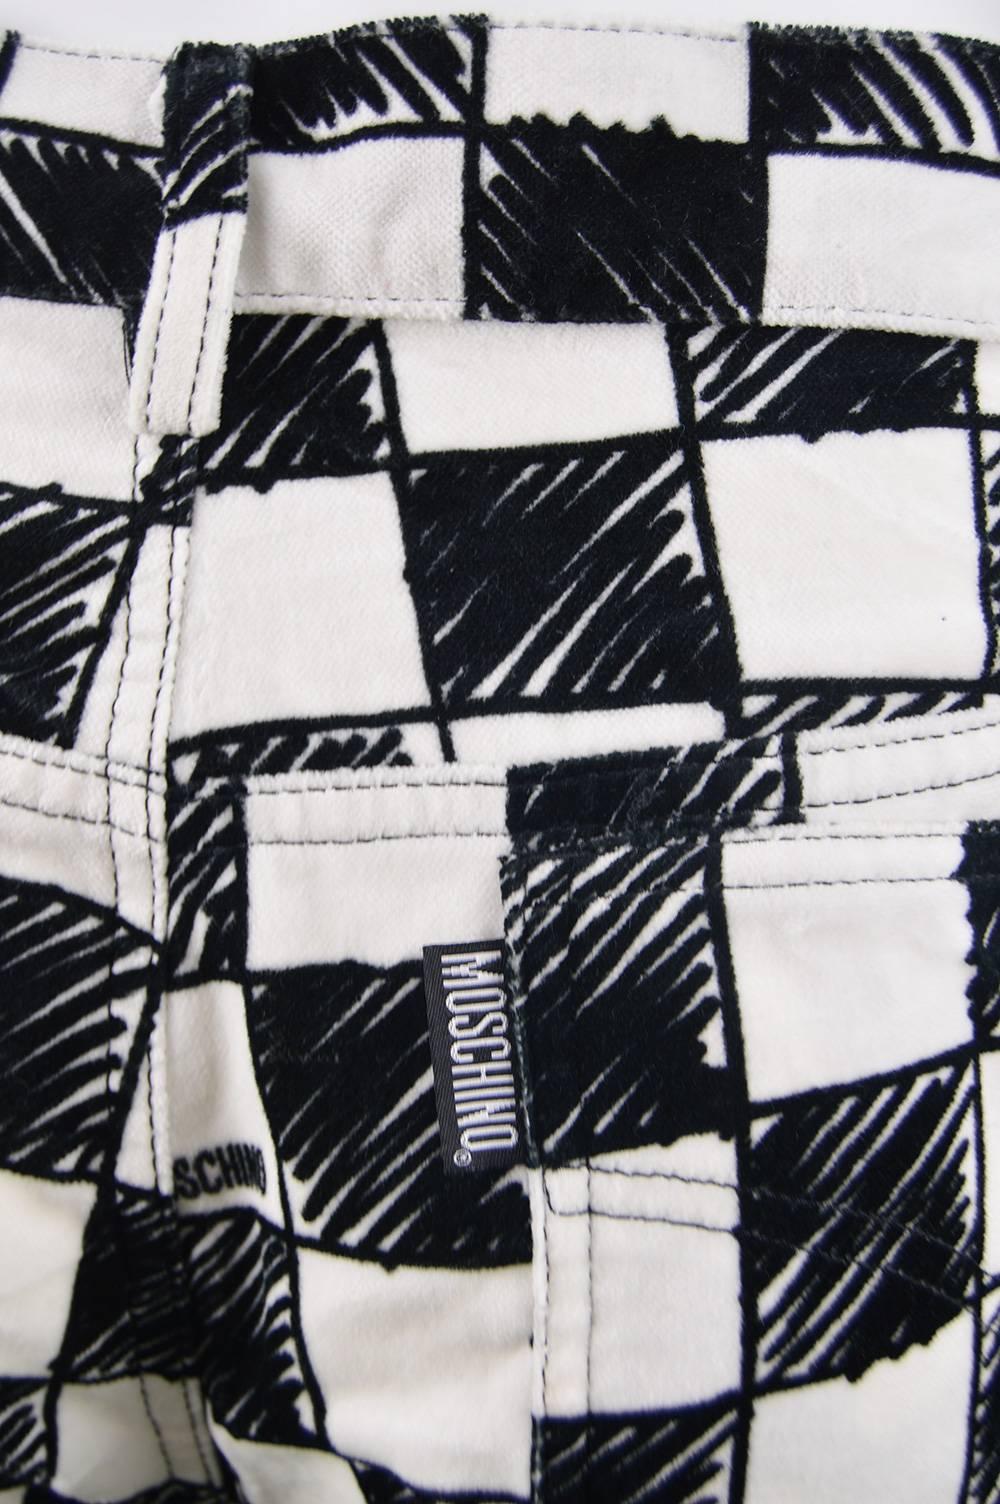 Moschino Men's Vintage Black and White Velvet Checkerboard Print Pants, 1990s In Excellent Condition For Sale In Doncaster, South Yorkshire